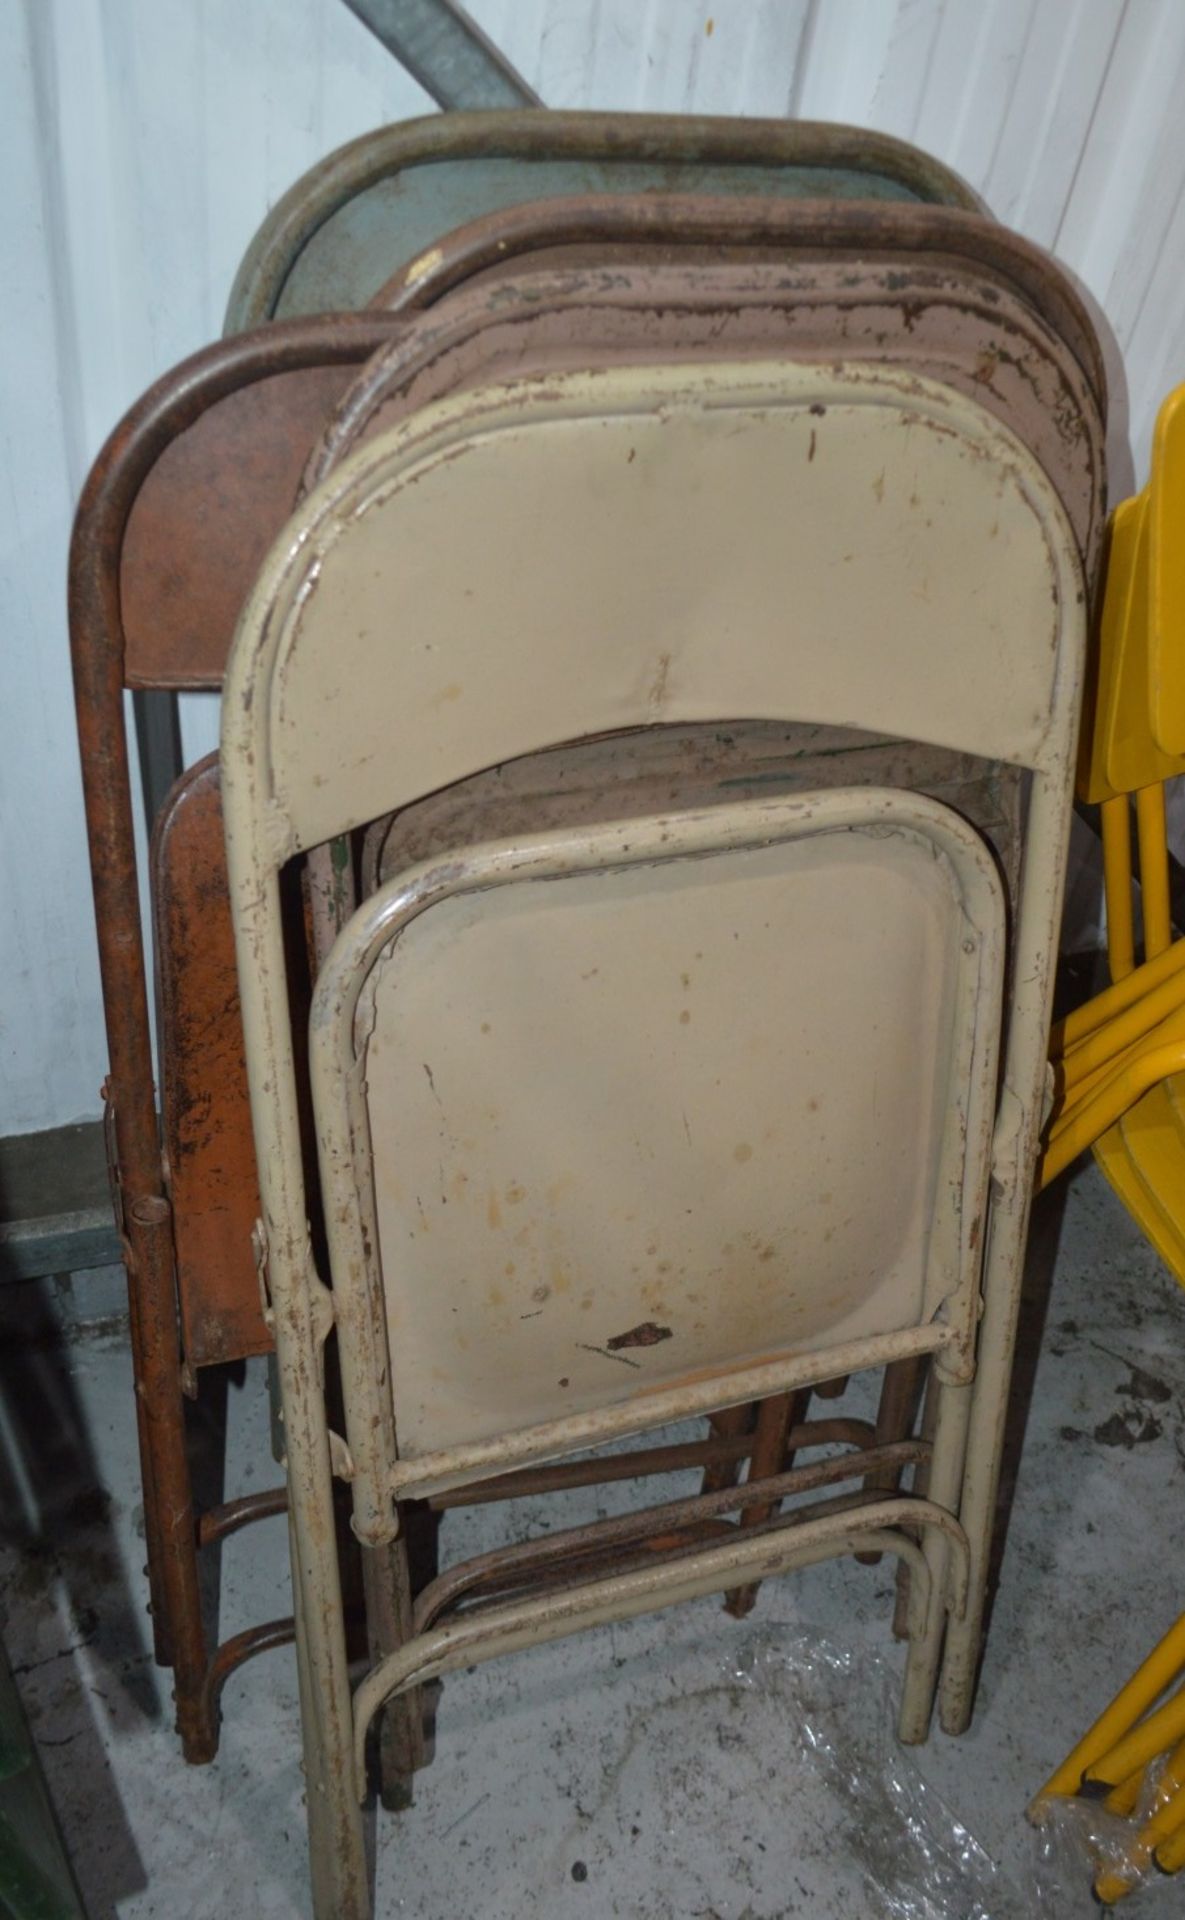 5 x Assorted Rustic Folding Metal Chairs - Dimensions (approx): H78 x W44 x D49cm, Seat 42cm - Image 5 of 6